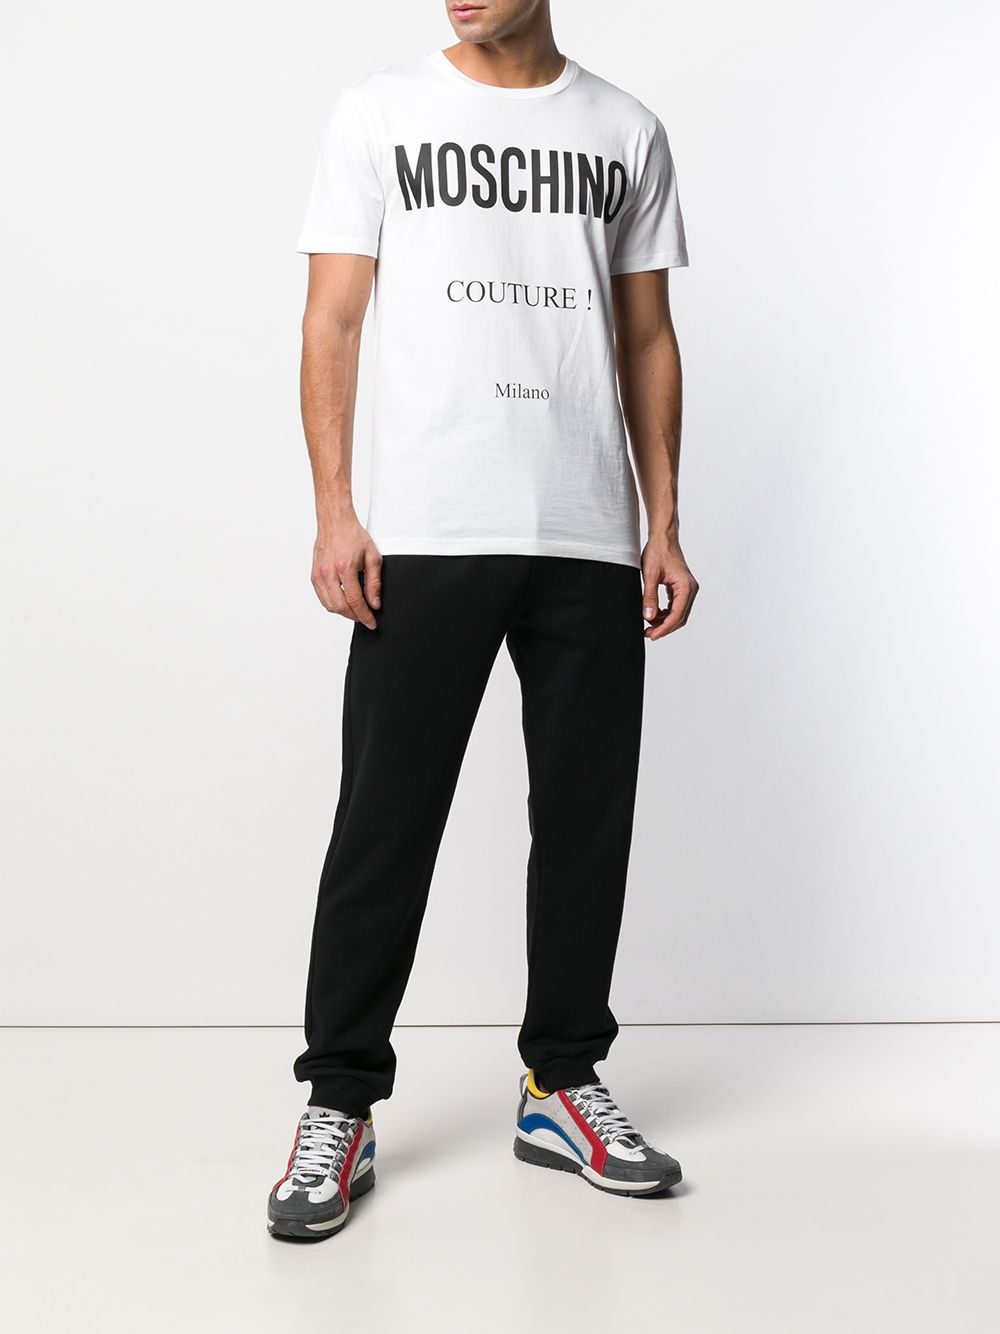 Moschino Couture ロゴ Tシャツ - Farfetch